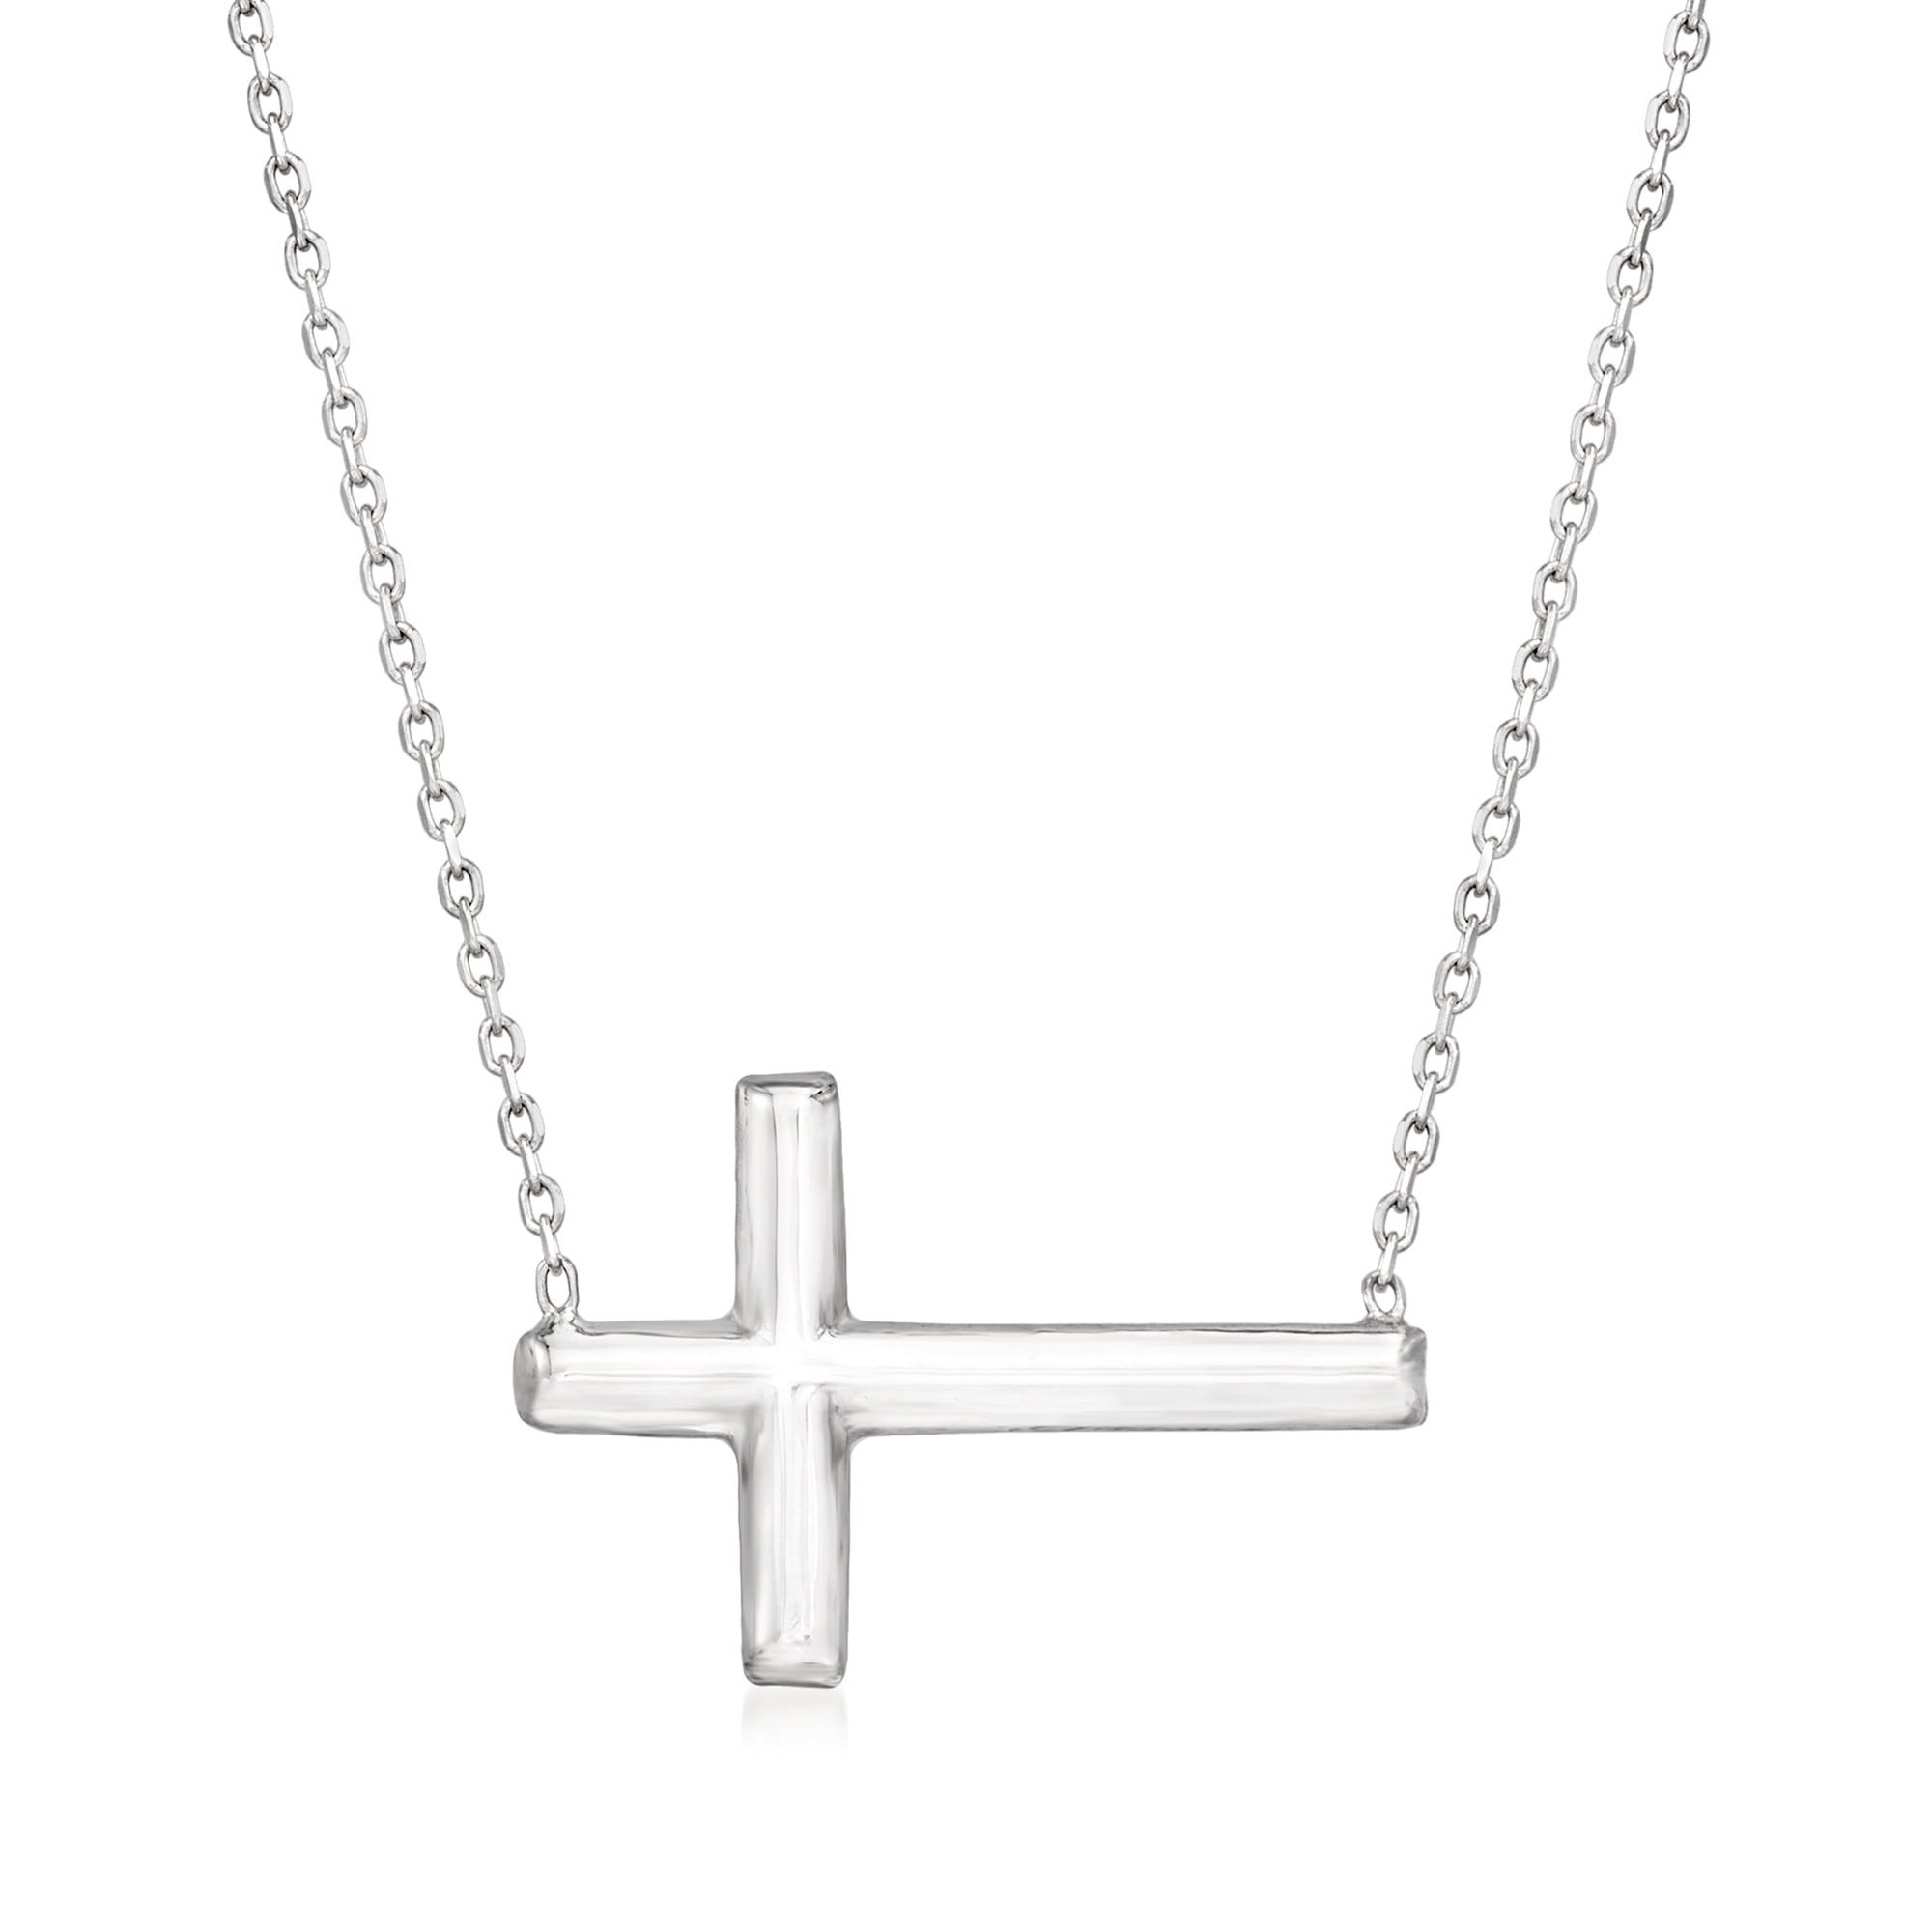 Personalized Scrollwork Cross Pendant Necklace in Sterling Silver 3 to 7  Birthstones | Ross-Simons